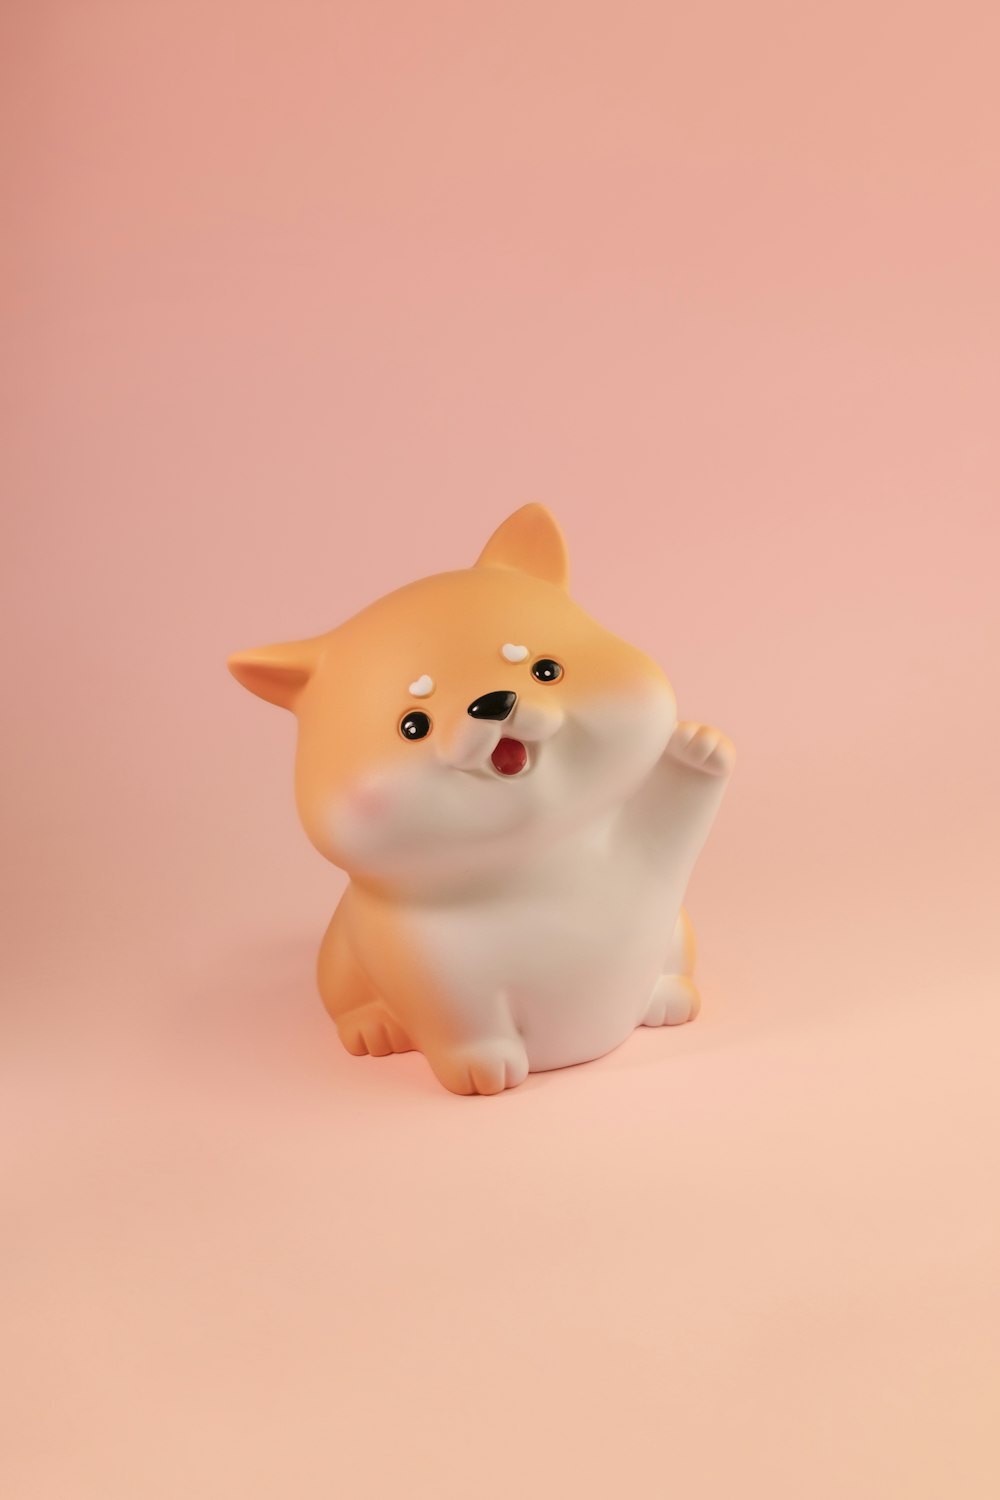 a small figurine of a dog on a pink background